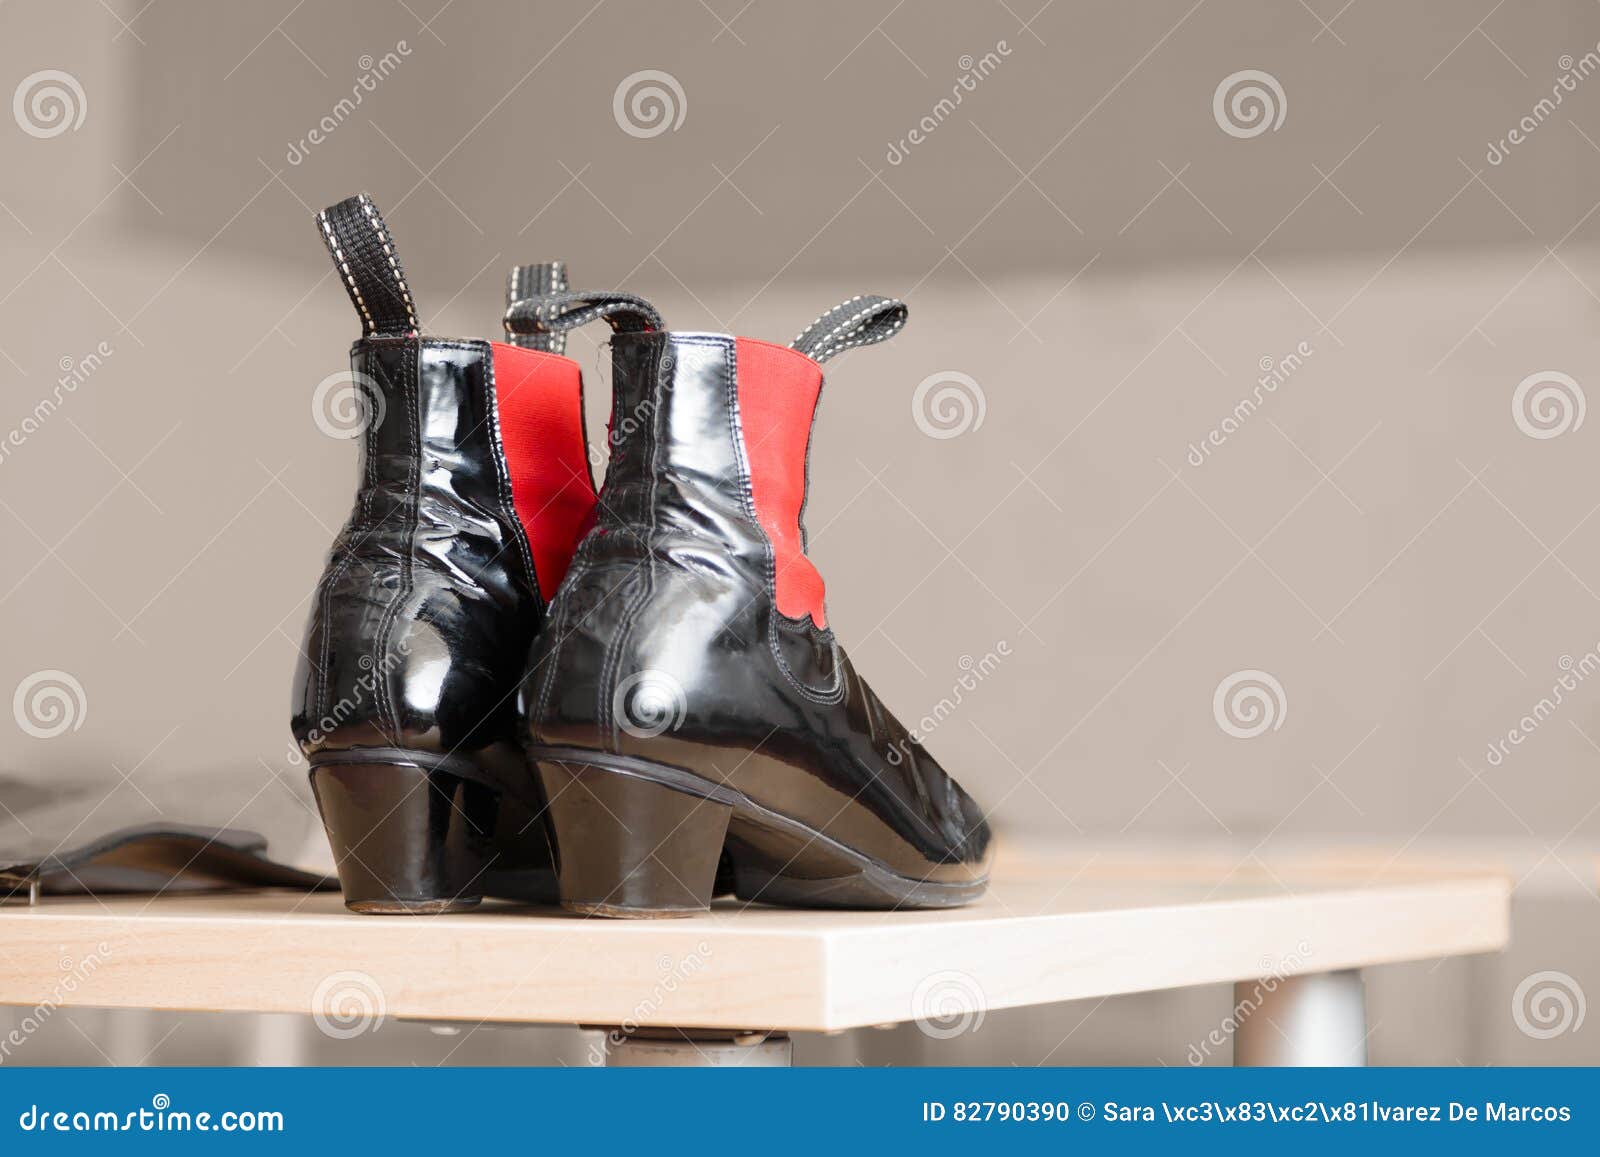 Pair of Black Leather Boots with Red Accents Stock Photo - Image of ...